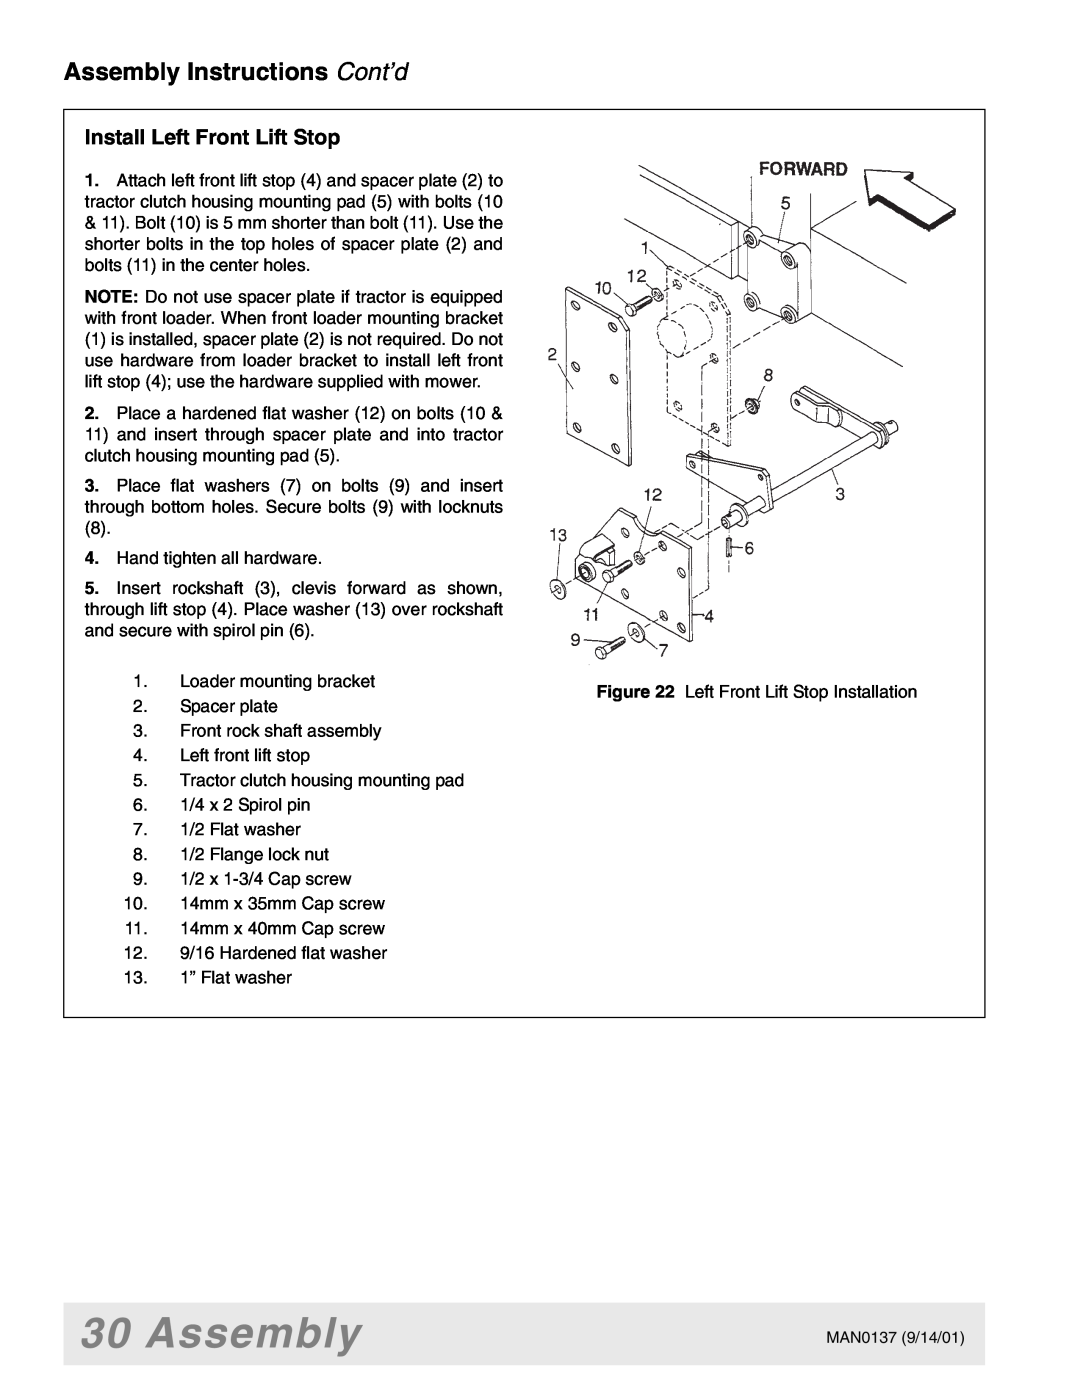 Woods Equipment 7000, 7192, 7194, 7195, 7200, 7205 manual Assembly Instructions Cont’d, Install Left Front Lift Stop 